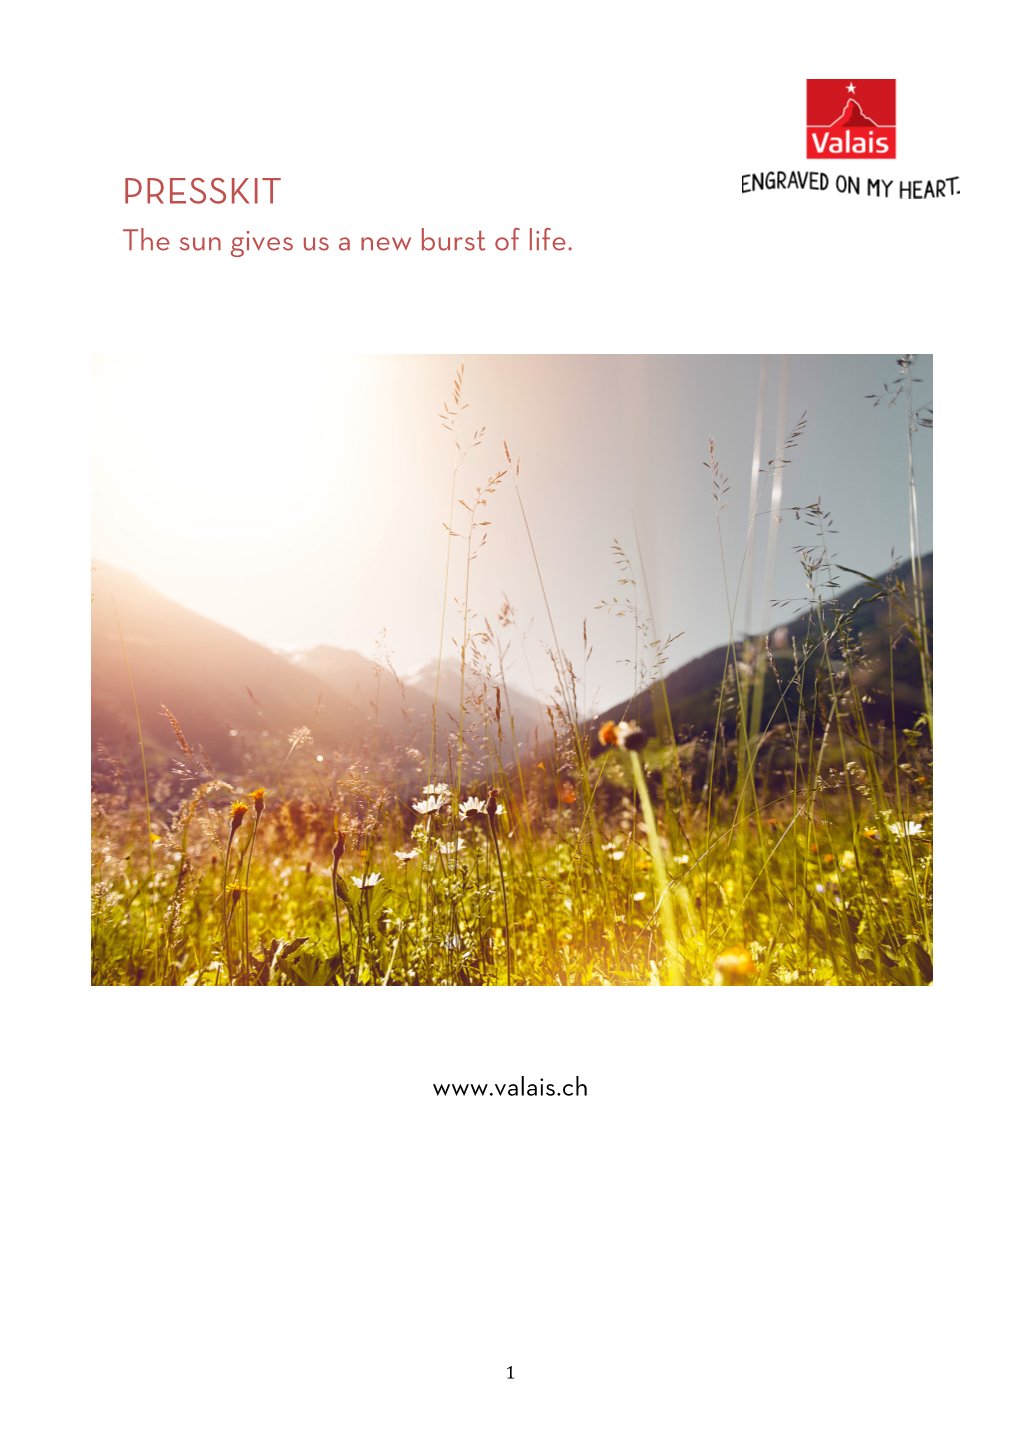 PRESSKIT the Sun Gives Us a New Burst of Life